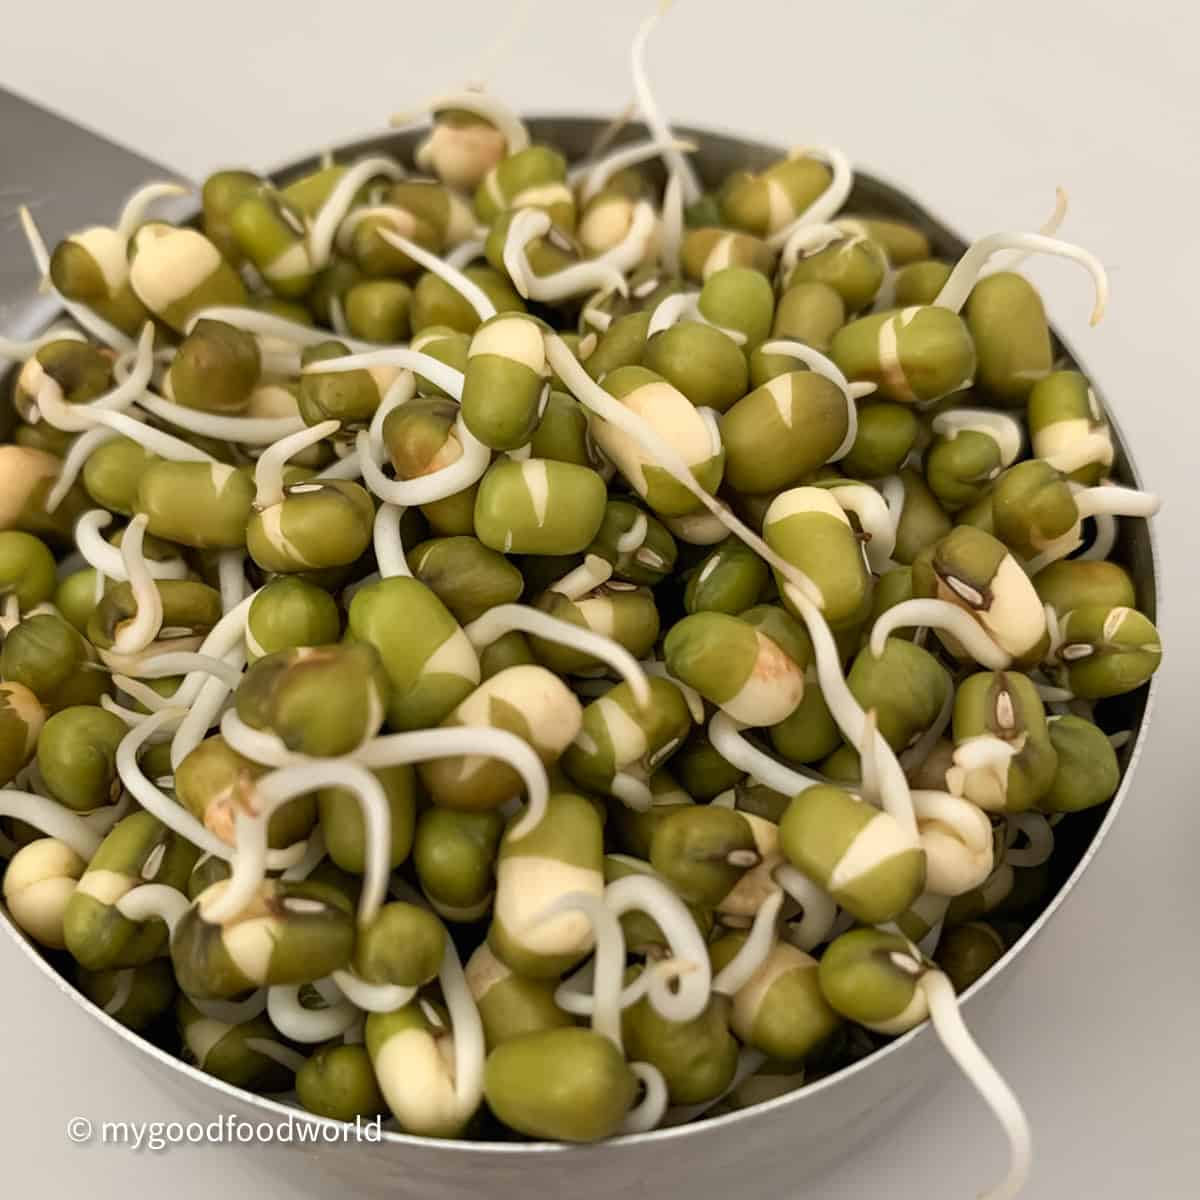 Green gram sprouts are placed in a stainless steel measuring cup which is placed on a light-colored background.